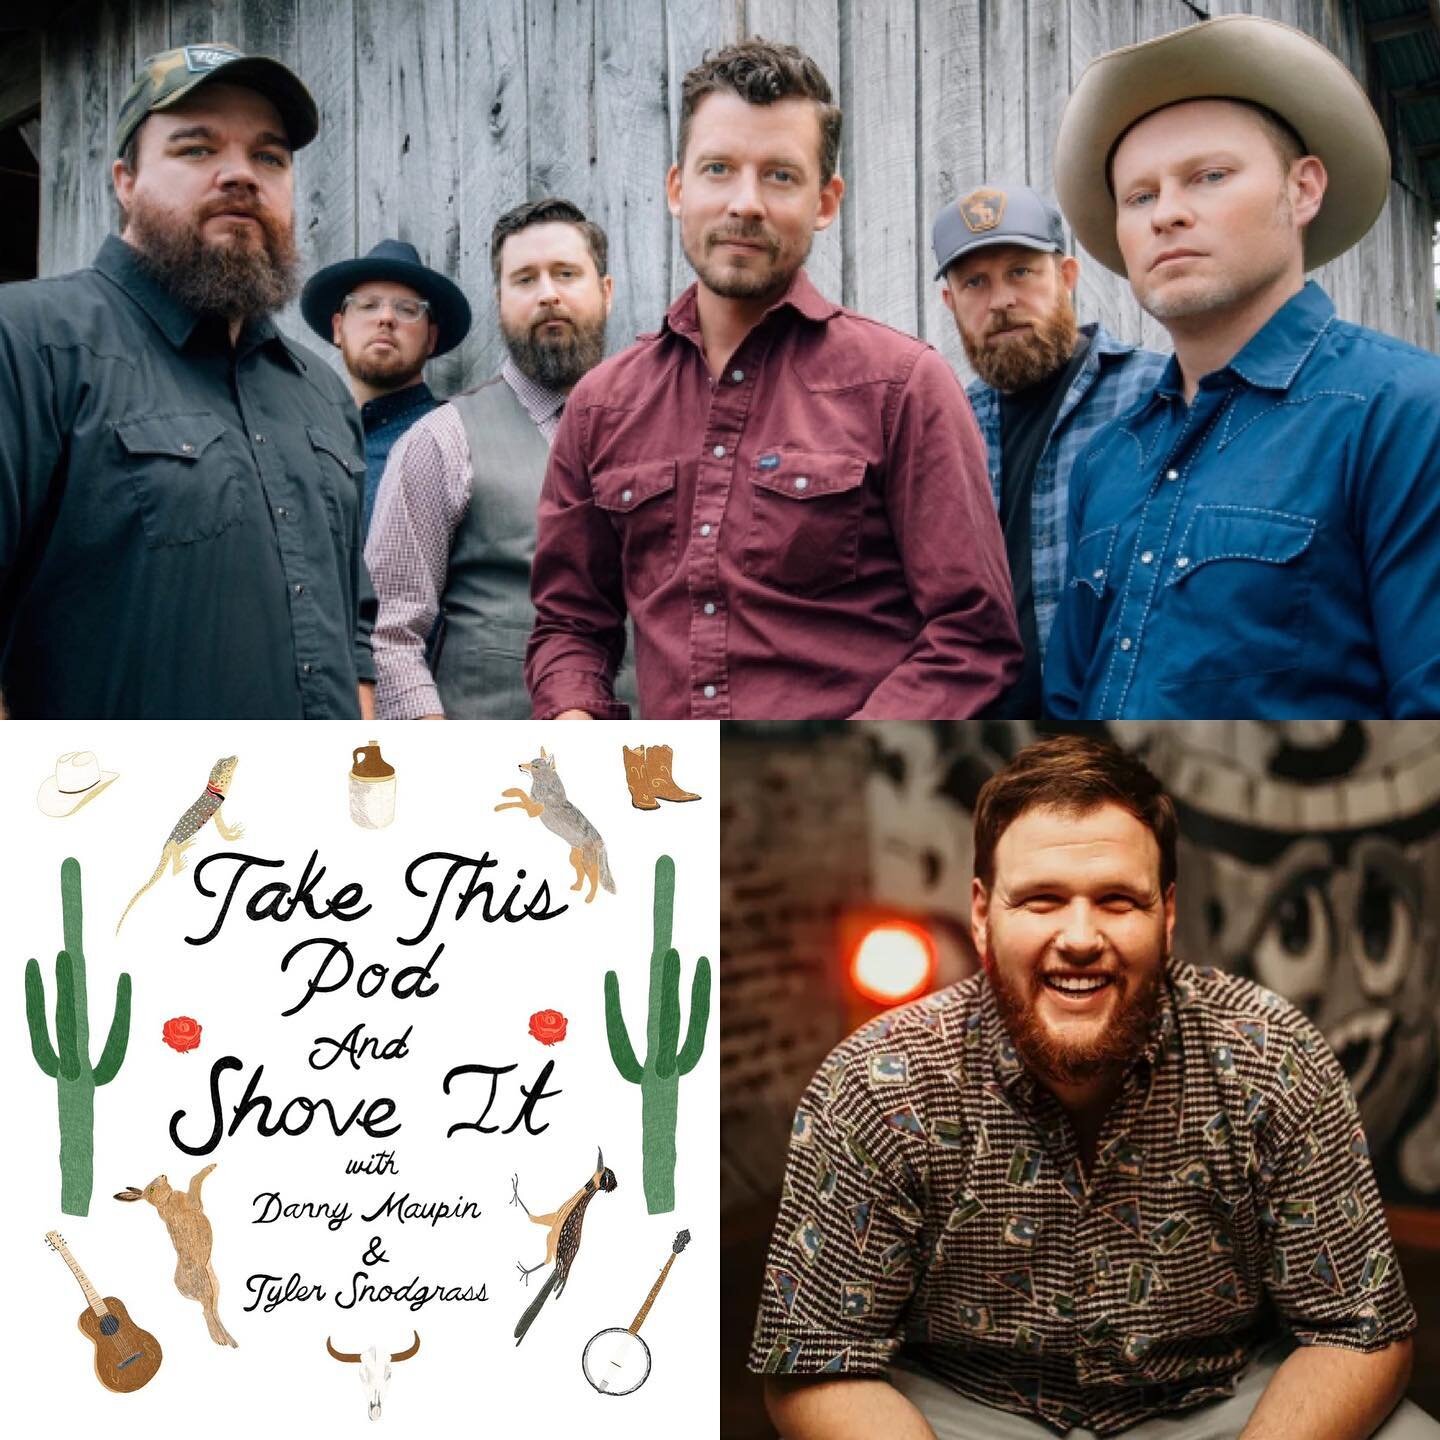 GOOD LORD LORRIE we&rsquo;ve got a great episode for ya this week! @formerlyfatstephen joins us to talk about his favorite band, Turnpike Troubadours! We discuss TT&rsquo;s evolution, recurring characters in music, and what exactly Red Dirt Country i